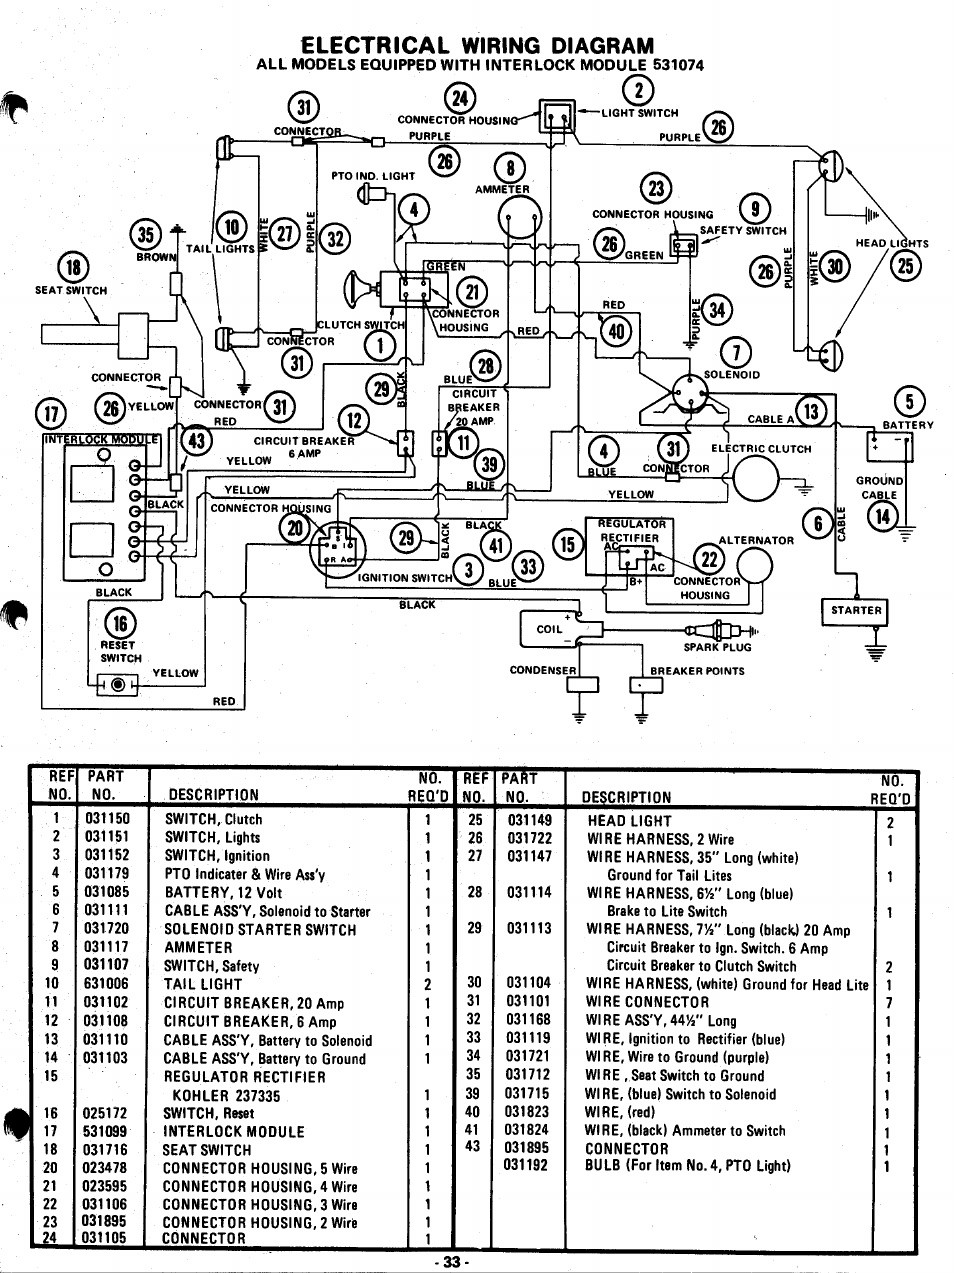 Electrical wiring diagram | Ariens 931015 S-18 User Manual | Page 33 / 42